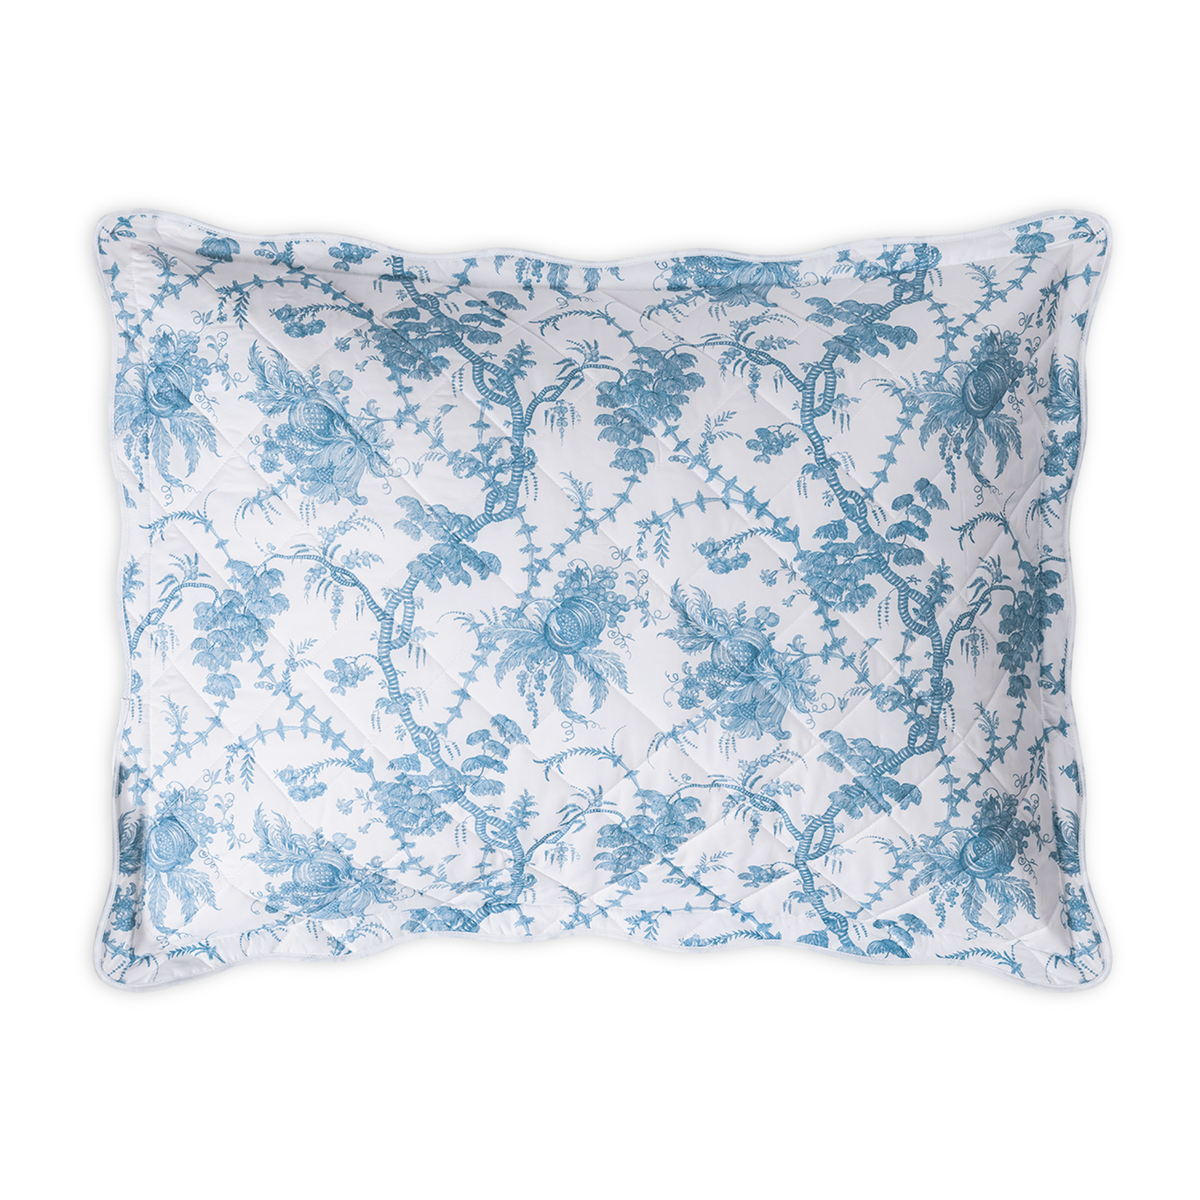 Quilted Sham of Matouk Schumacher San Cristobal Bedding in Sky Color